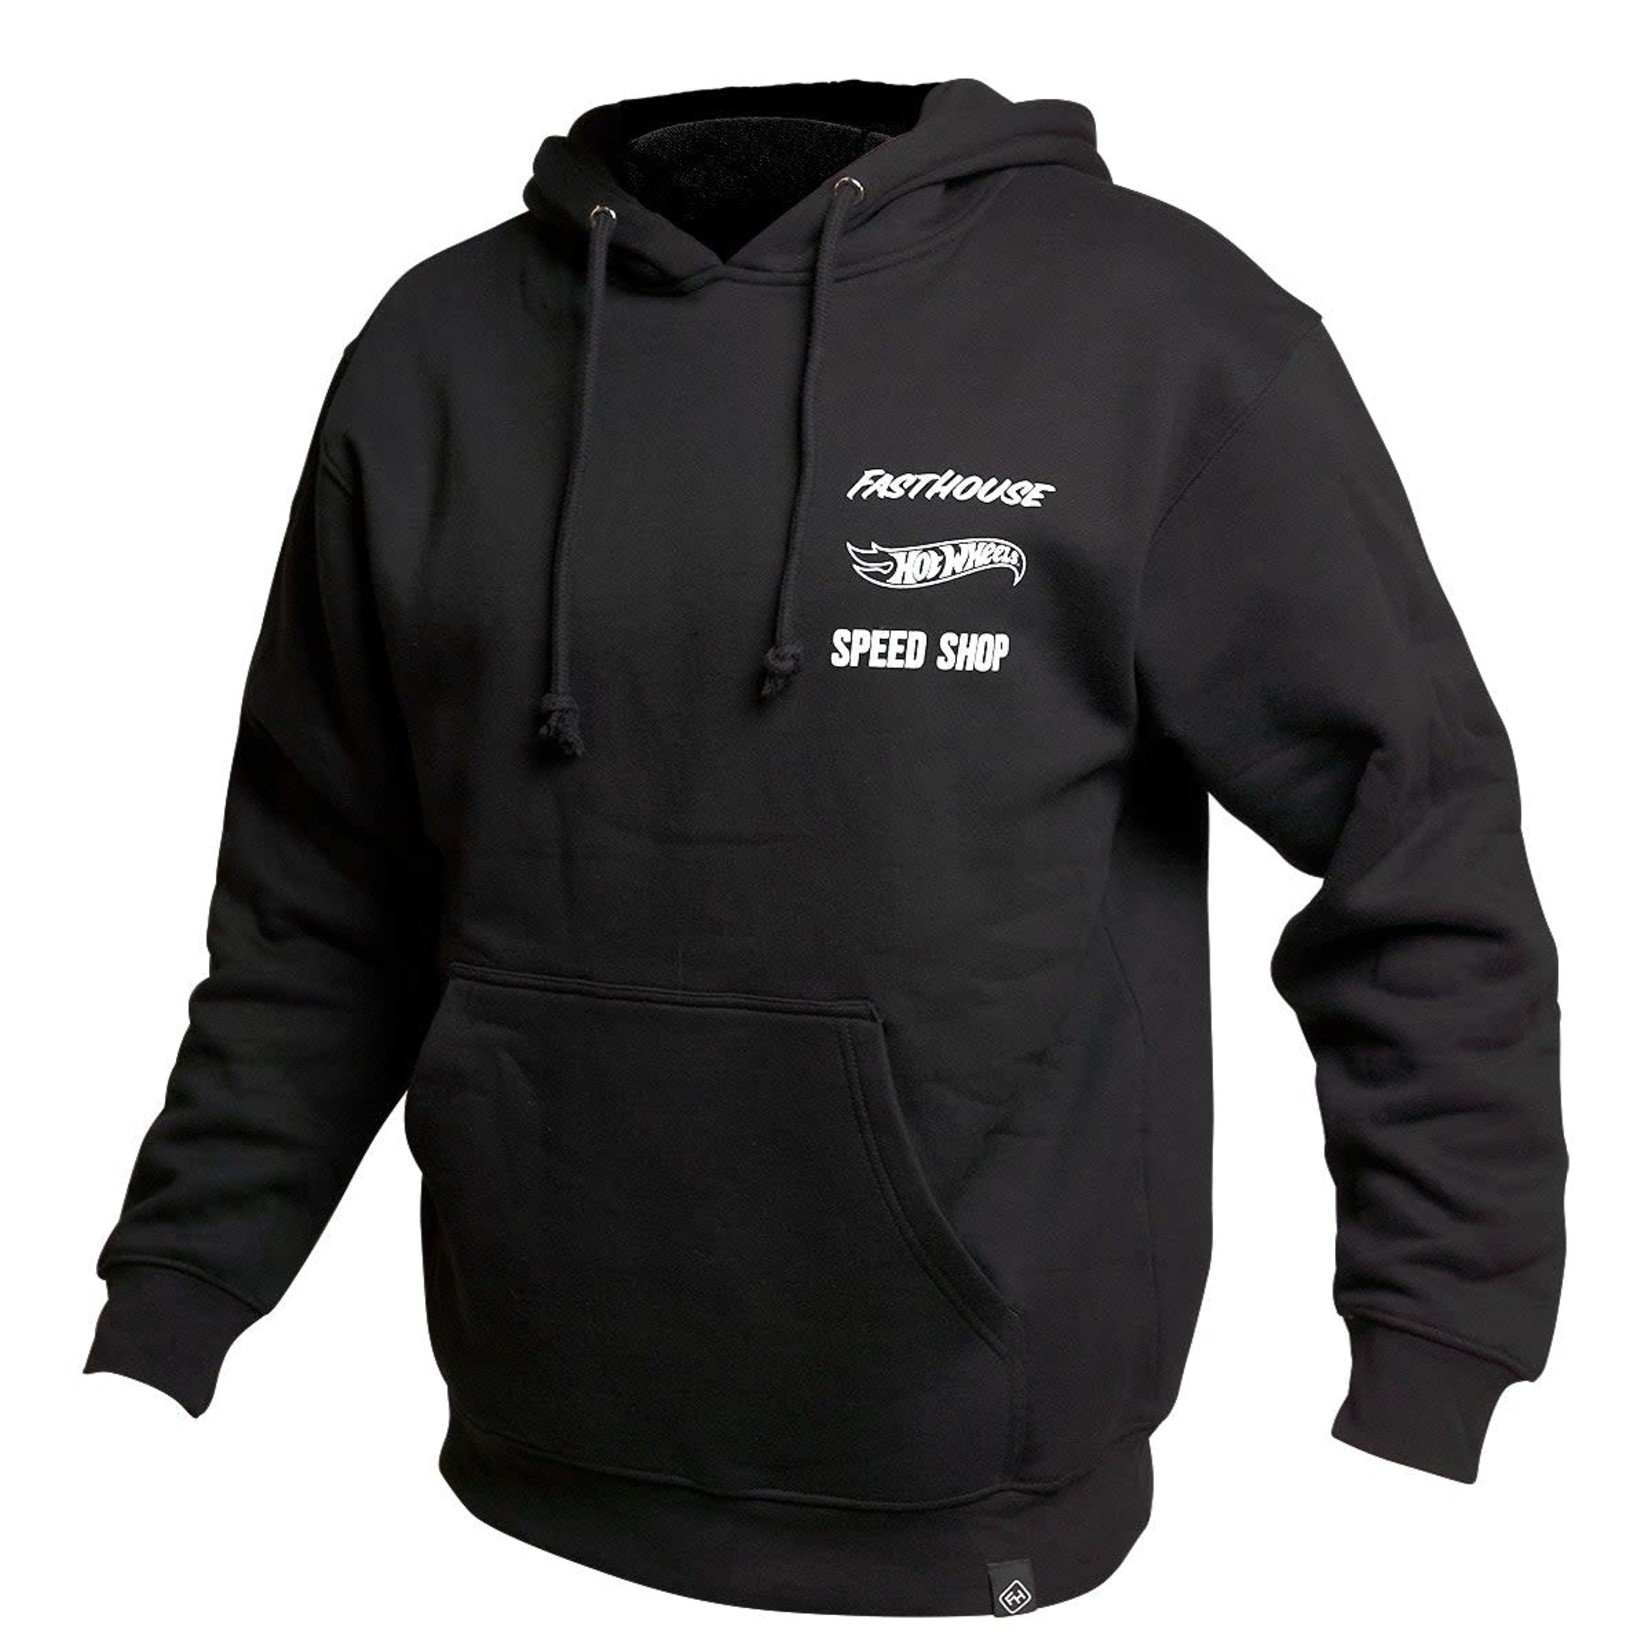 FASTHOUSE Rush Hot Wheels Hooded Pullover Black